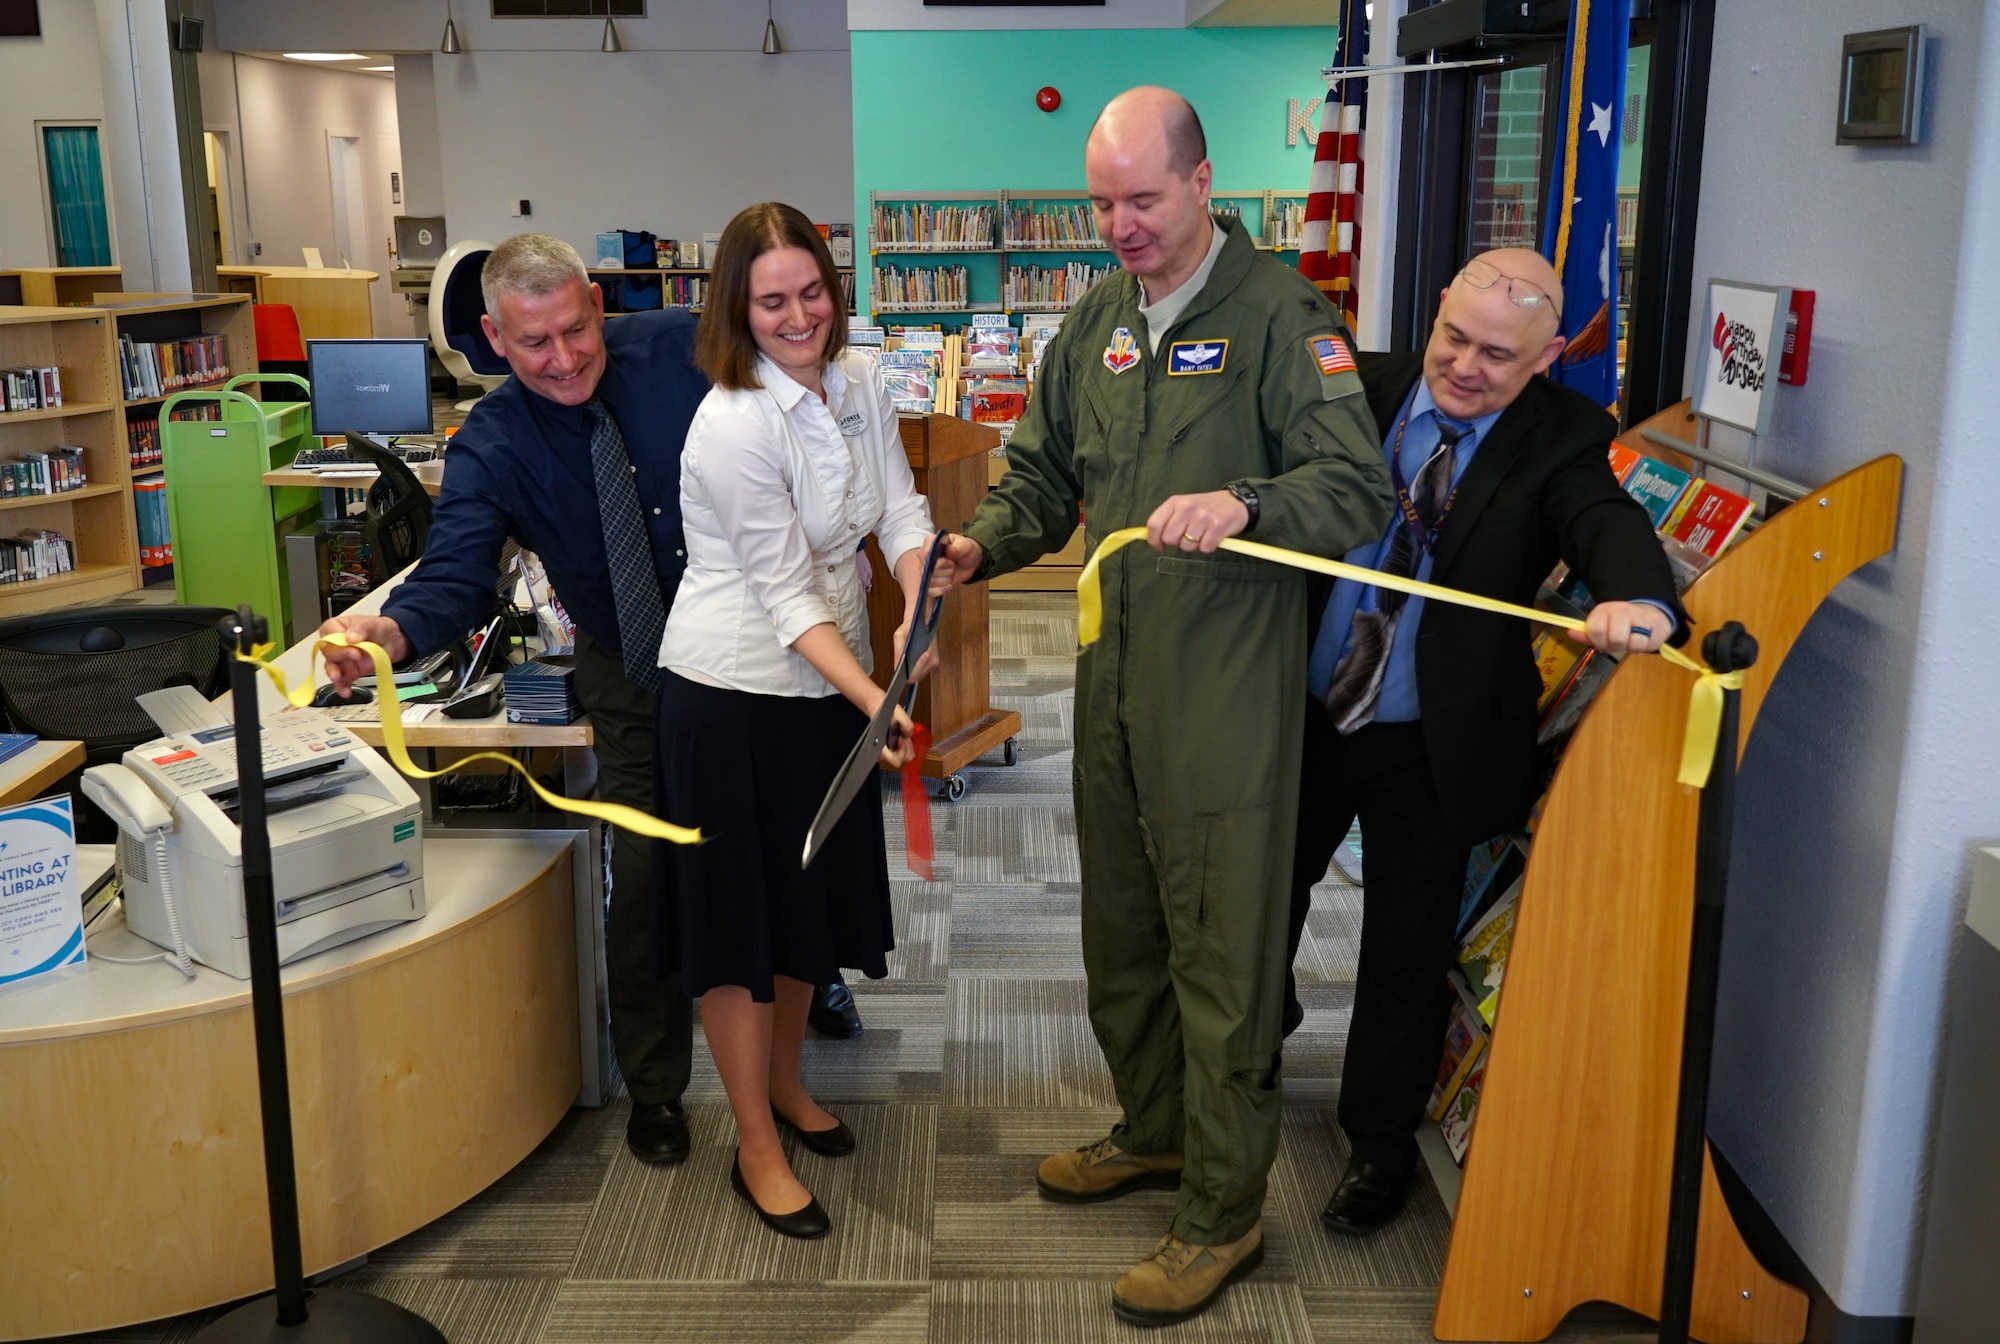 Veronica Holseth, library director, left, and Col. Bart Yates, 319th Reconnaissance Wing vice commander, right, cut a ribbon during the grand re-opening of the base library March 4, 2020, on Grand Forks Air Force Base, N.D. Base leaders, families and members of the local community joined the ceremony to celebrate the new facilities, receive a tour and participate in story time. (U.S. Air Force photo by Senior Airman Elora J. McCutcheon)